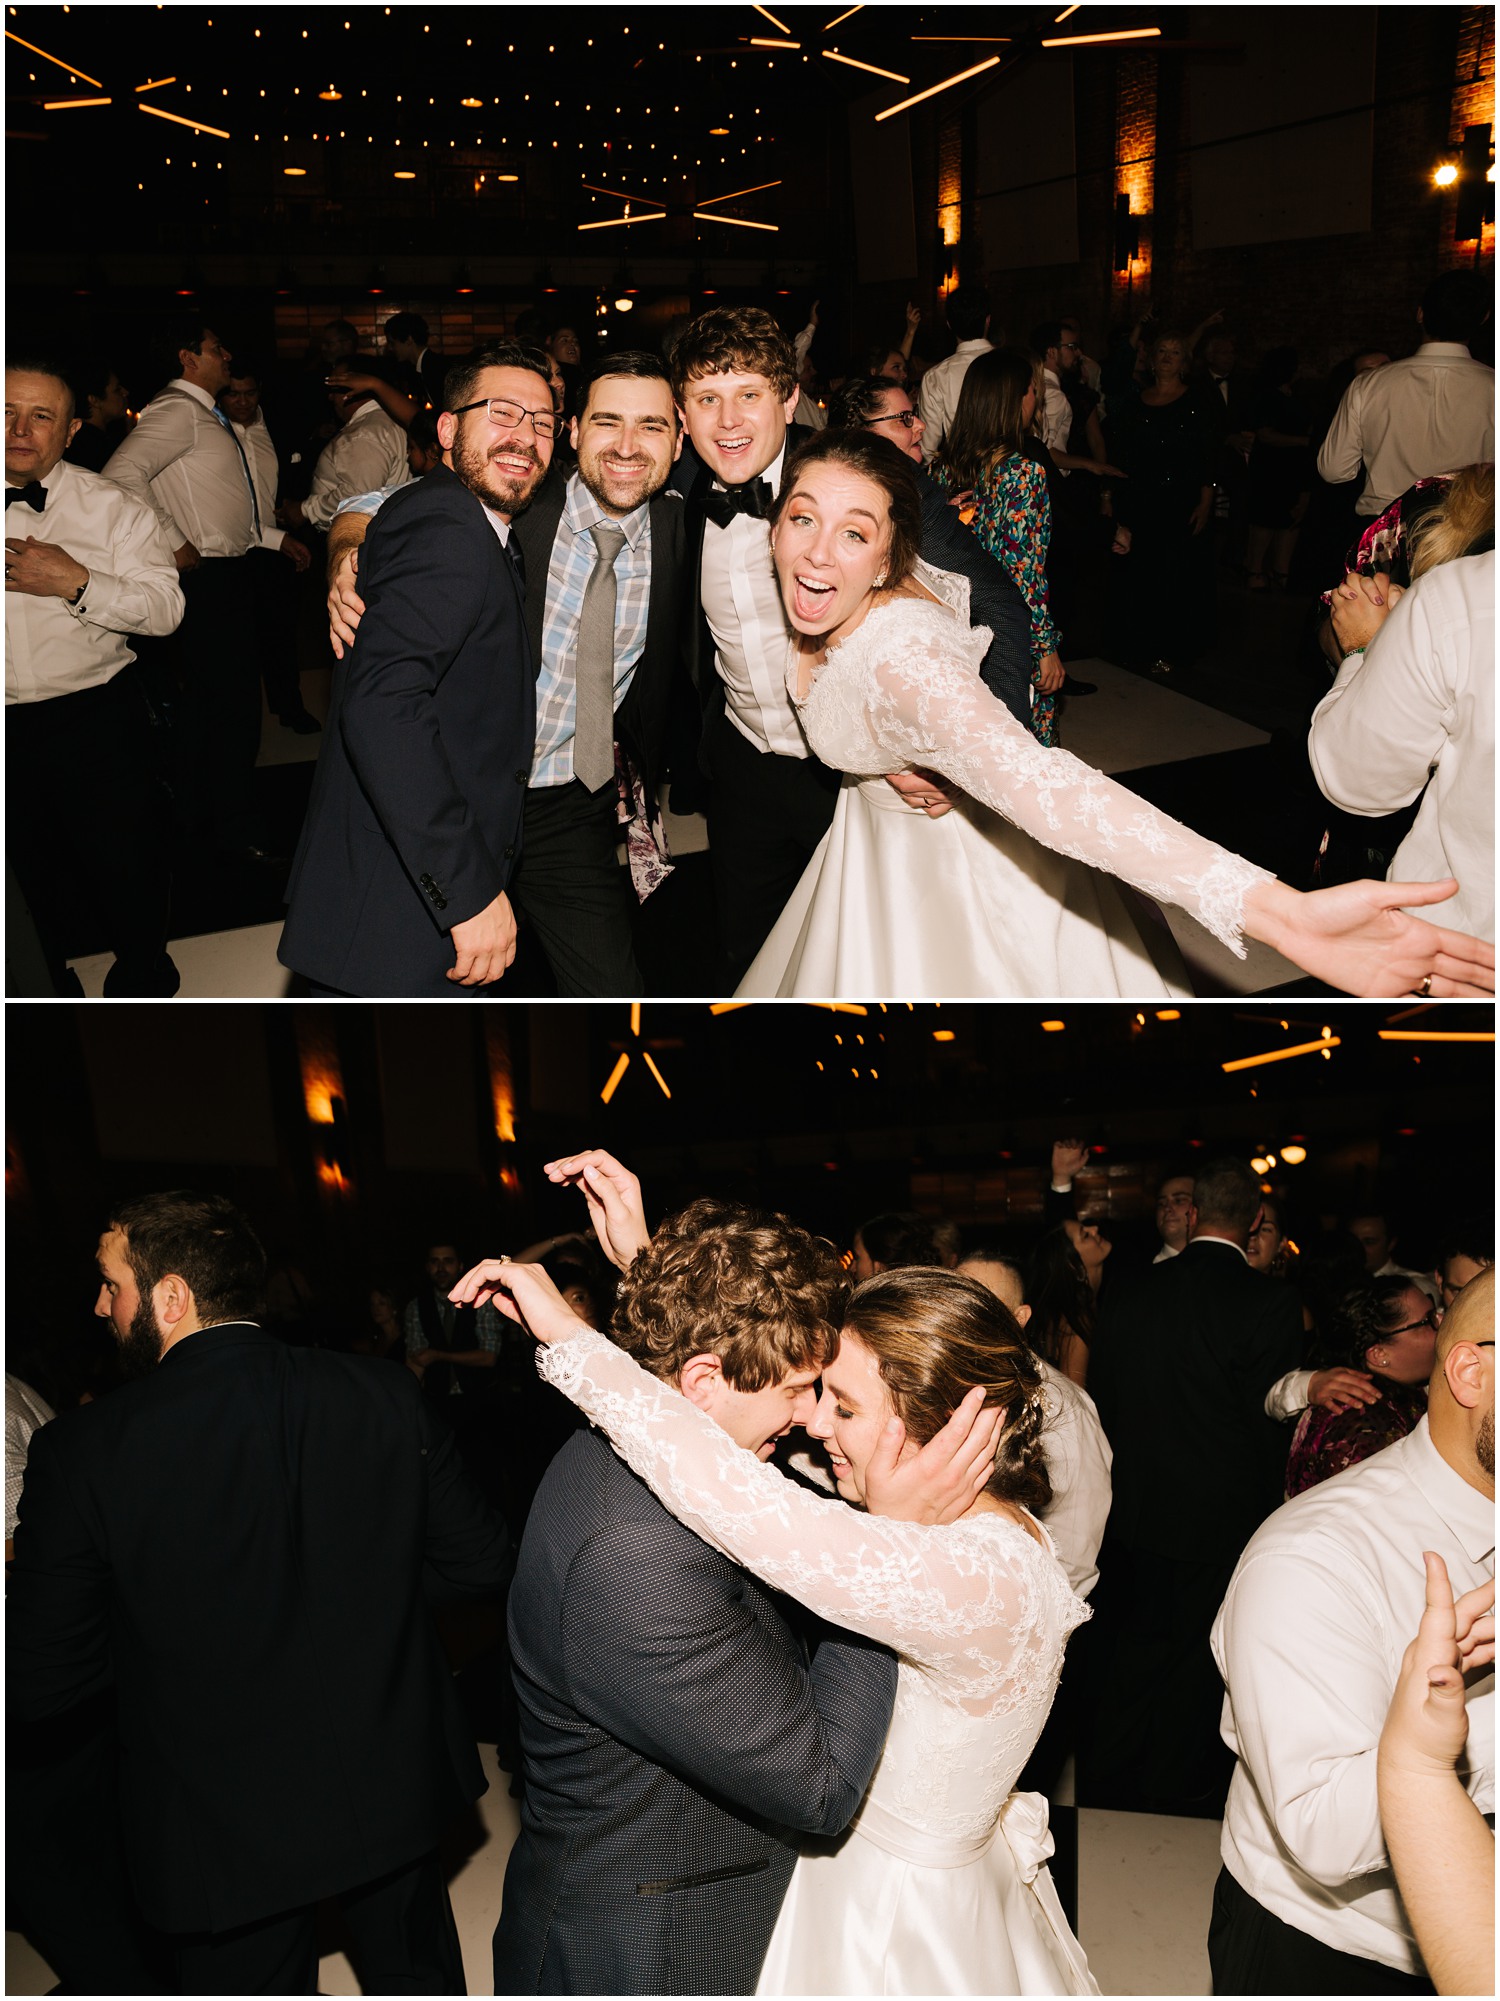 bride and groom dance during wedding reception photographed by Chelsea Renay Photography